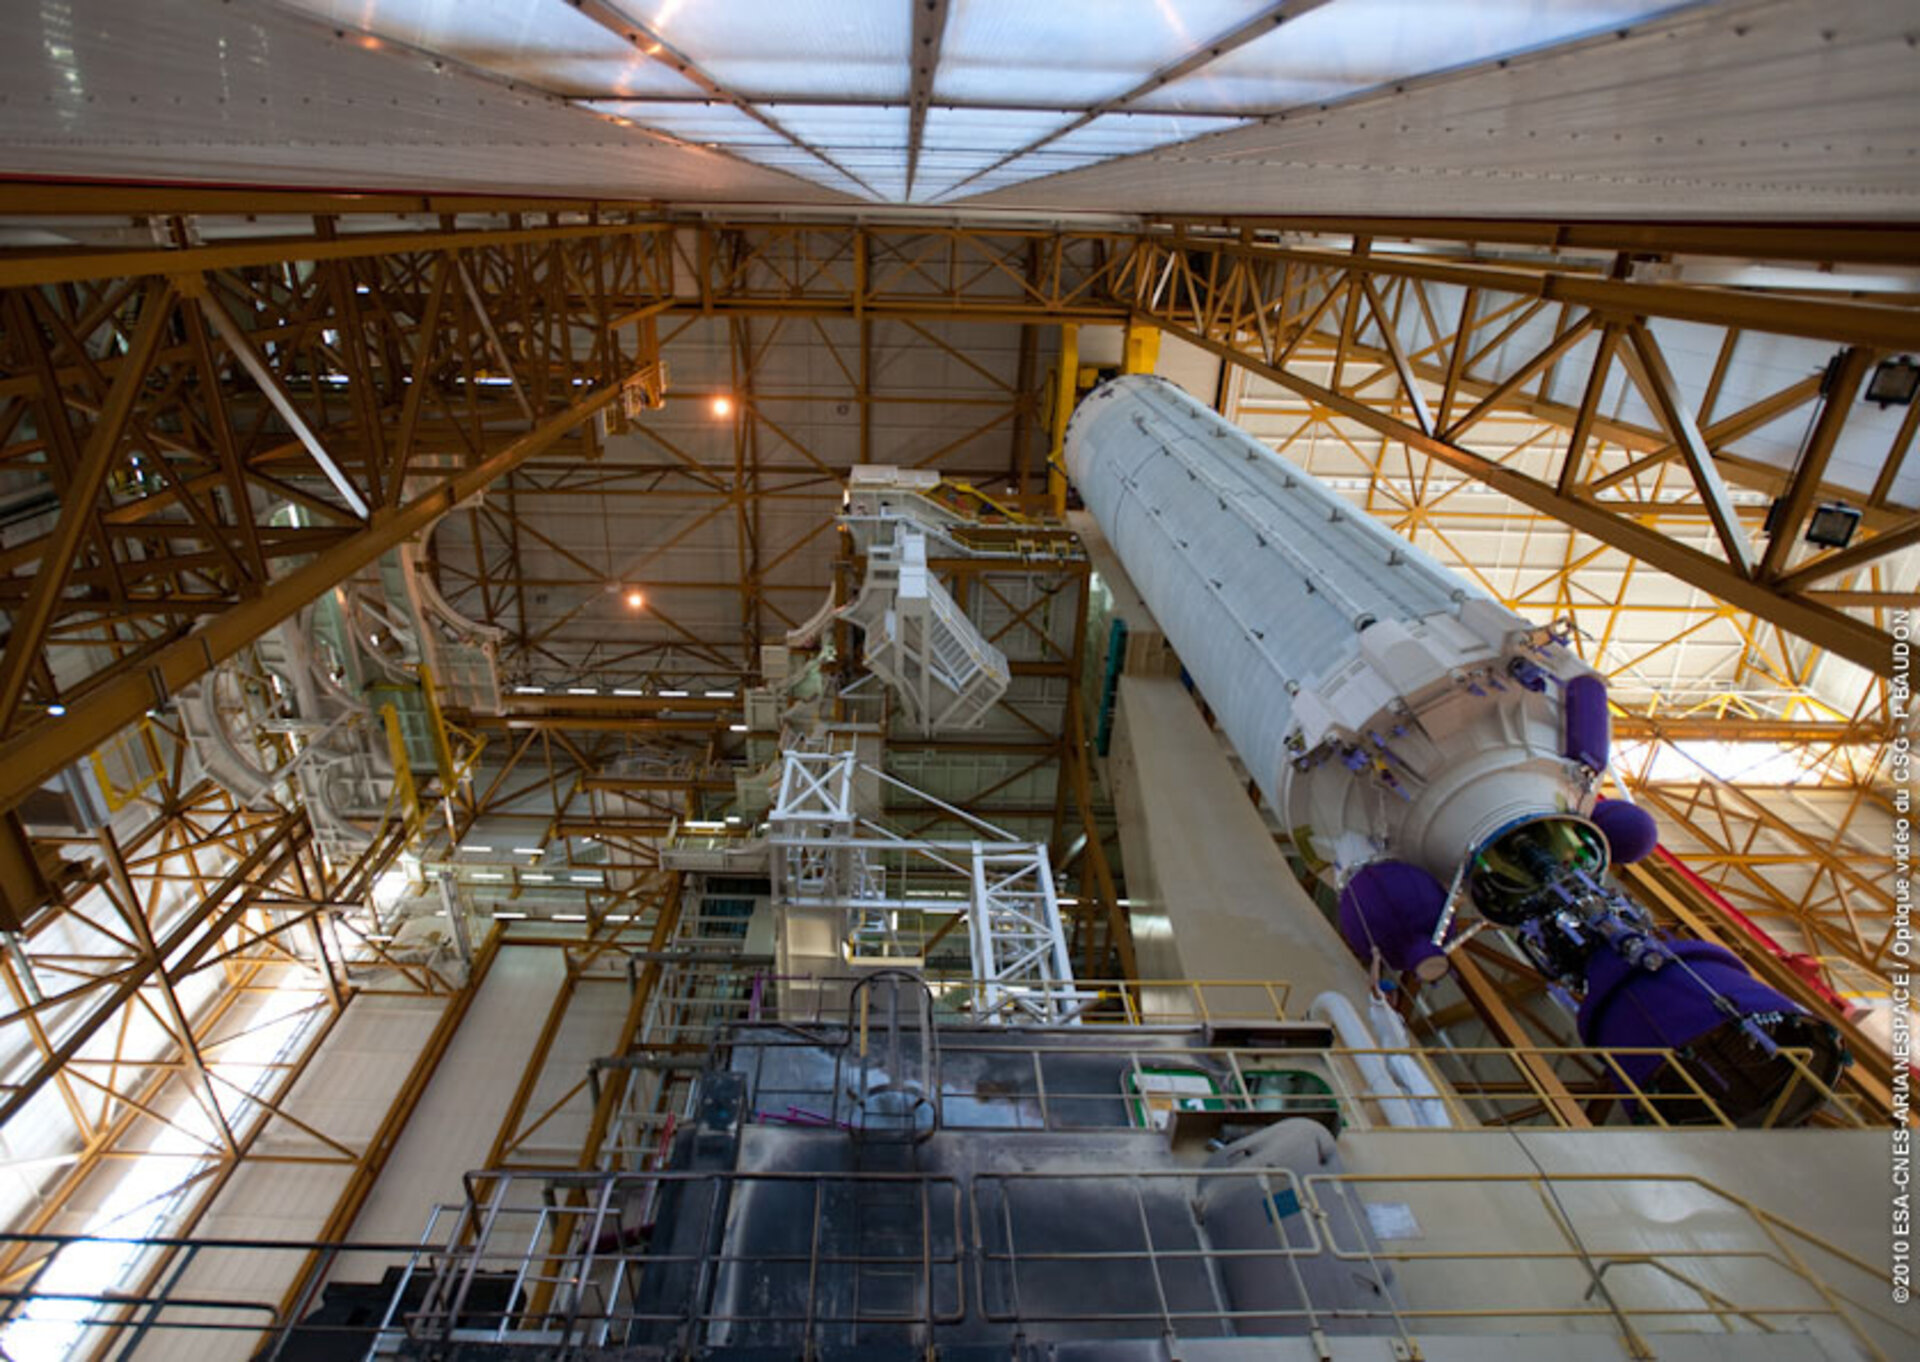 200th Ariane being assembled in December 2010